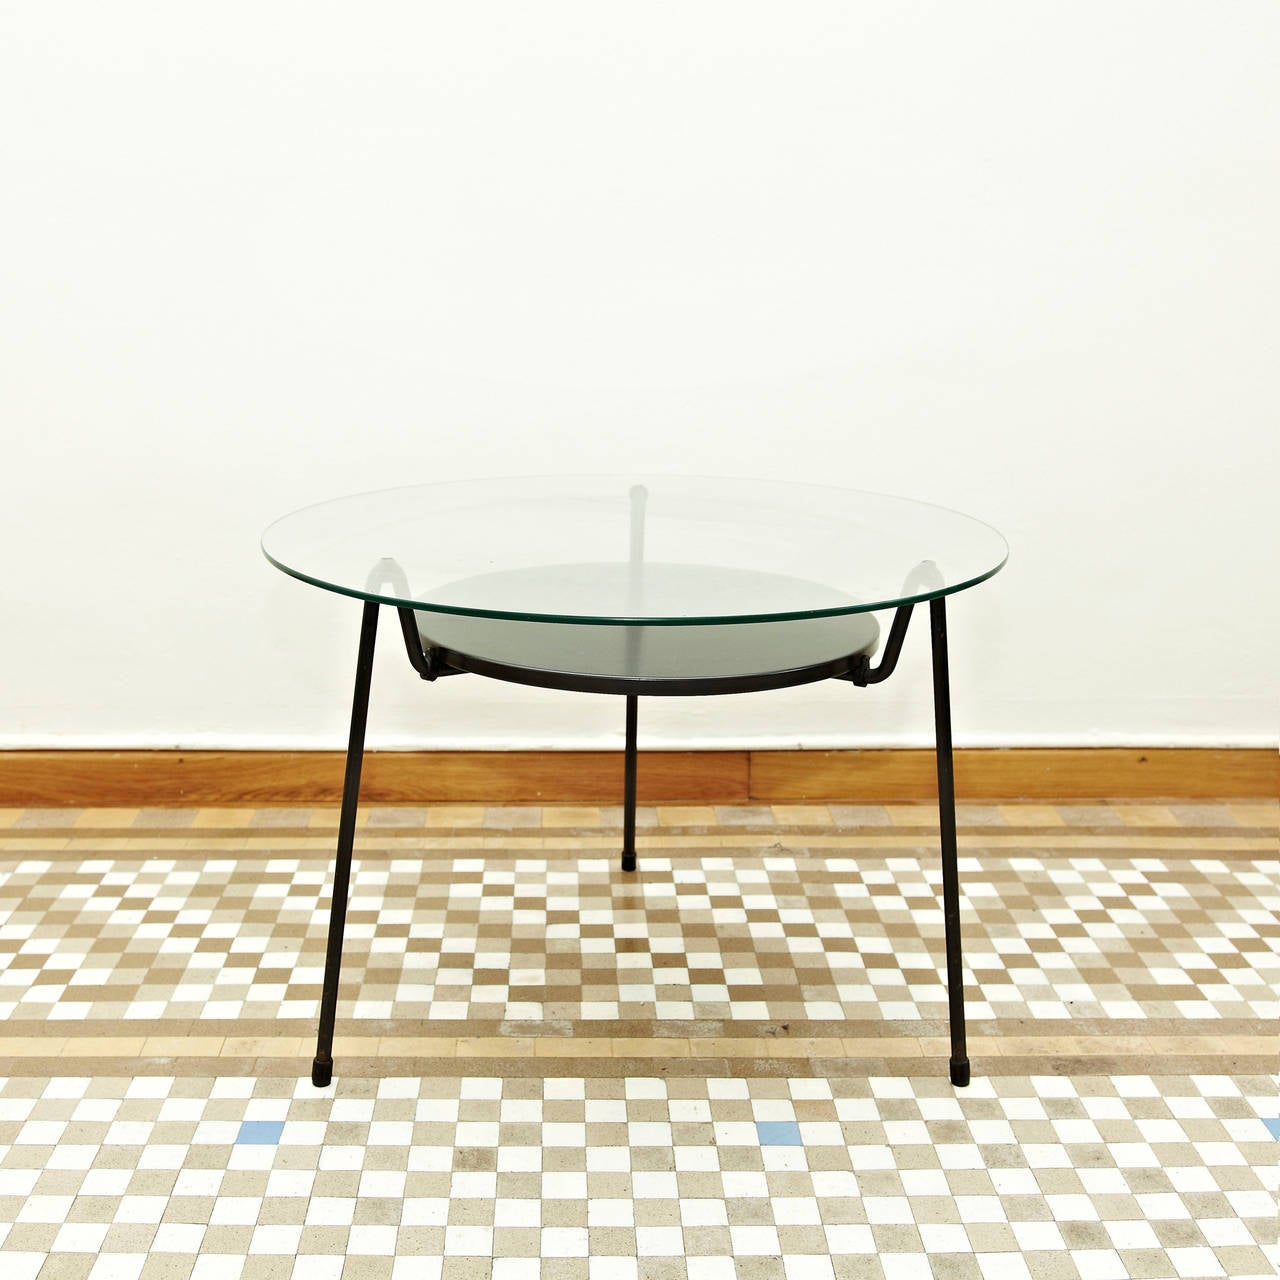 Coffee Table, model mosquito, designed by Wim Rietveld in 1955.
Manufactured by Gispen (Netherlands) around 1955.
Lacquered metal frame, metal plate and glass top.

In good excellent original condition, preserving a beautifull patina.

Wim